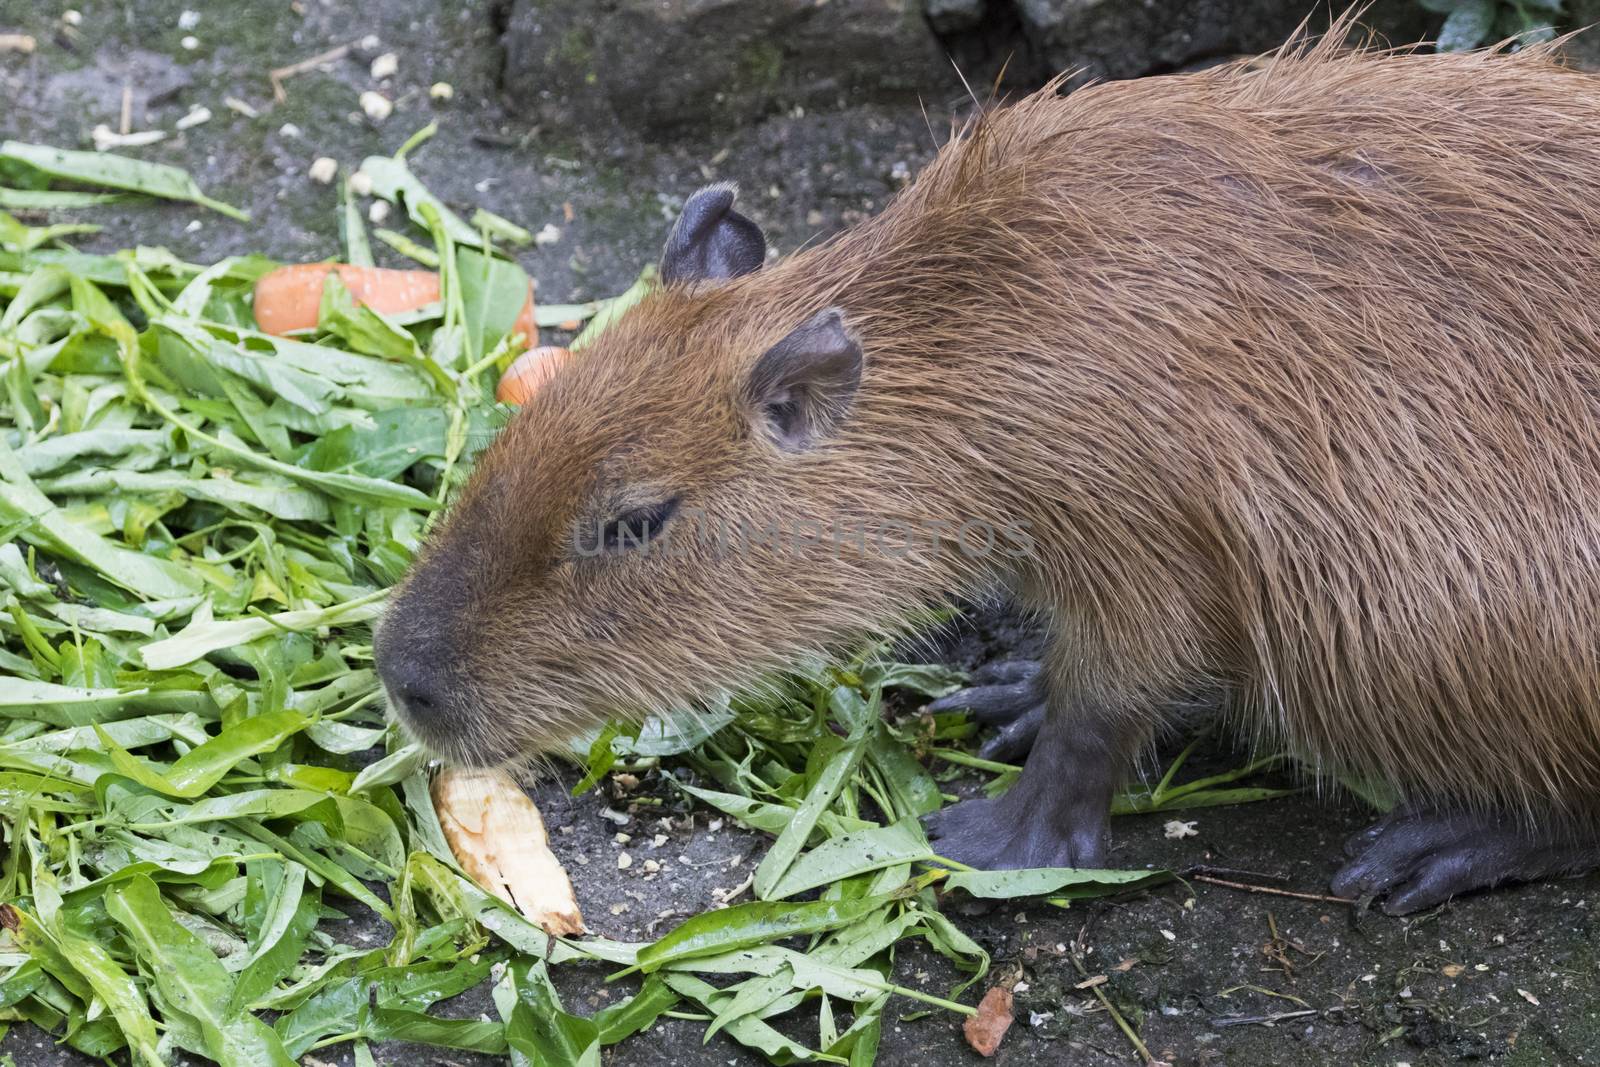 Image of a muskrat (Ondatra zibethicus) eating morning glory